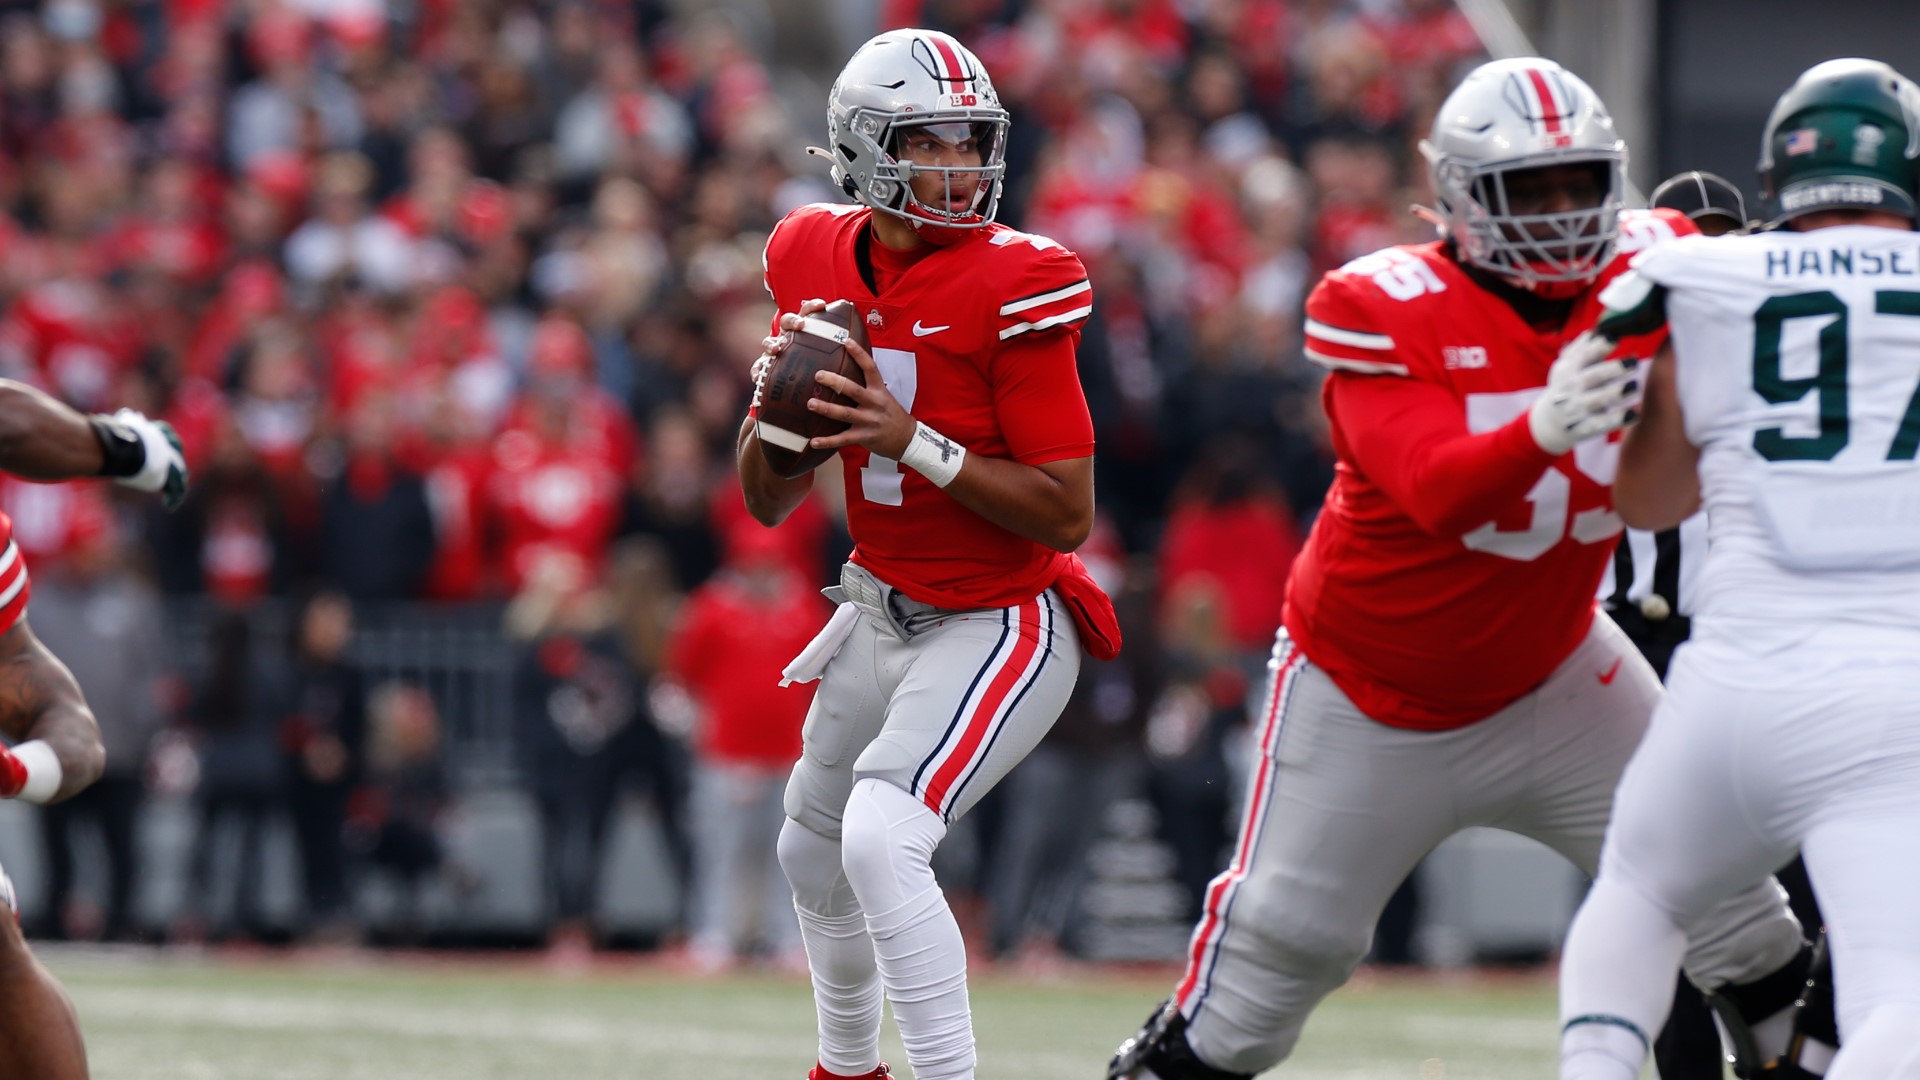 The Ohio State Heisman Trophy candidate and record-setting QB was honored with three major awards by the Big Ten Conference.